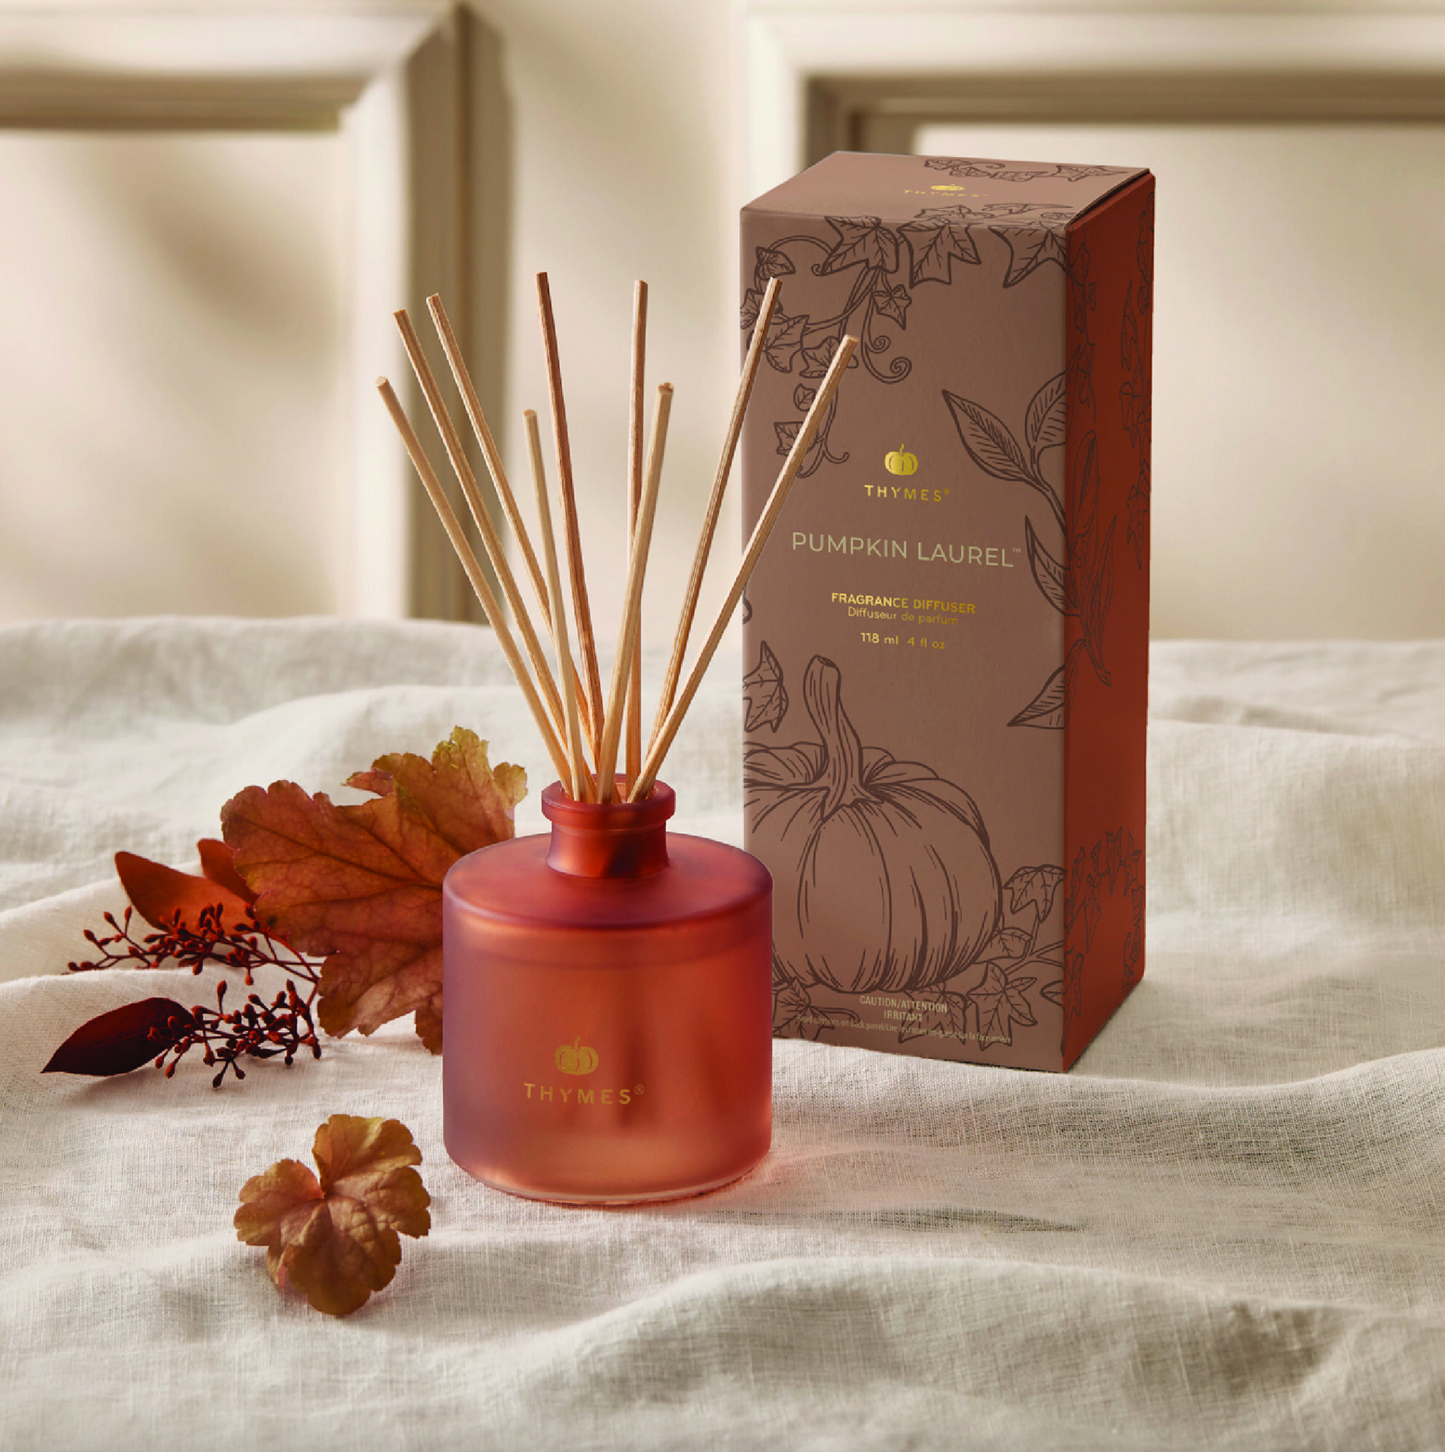 Thymes Pumpkin Laurel Petite Reed Diffuser Scents in  at Wrapsody